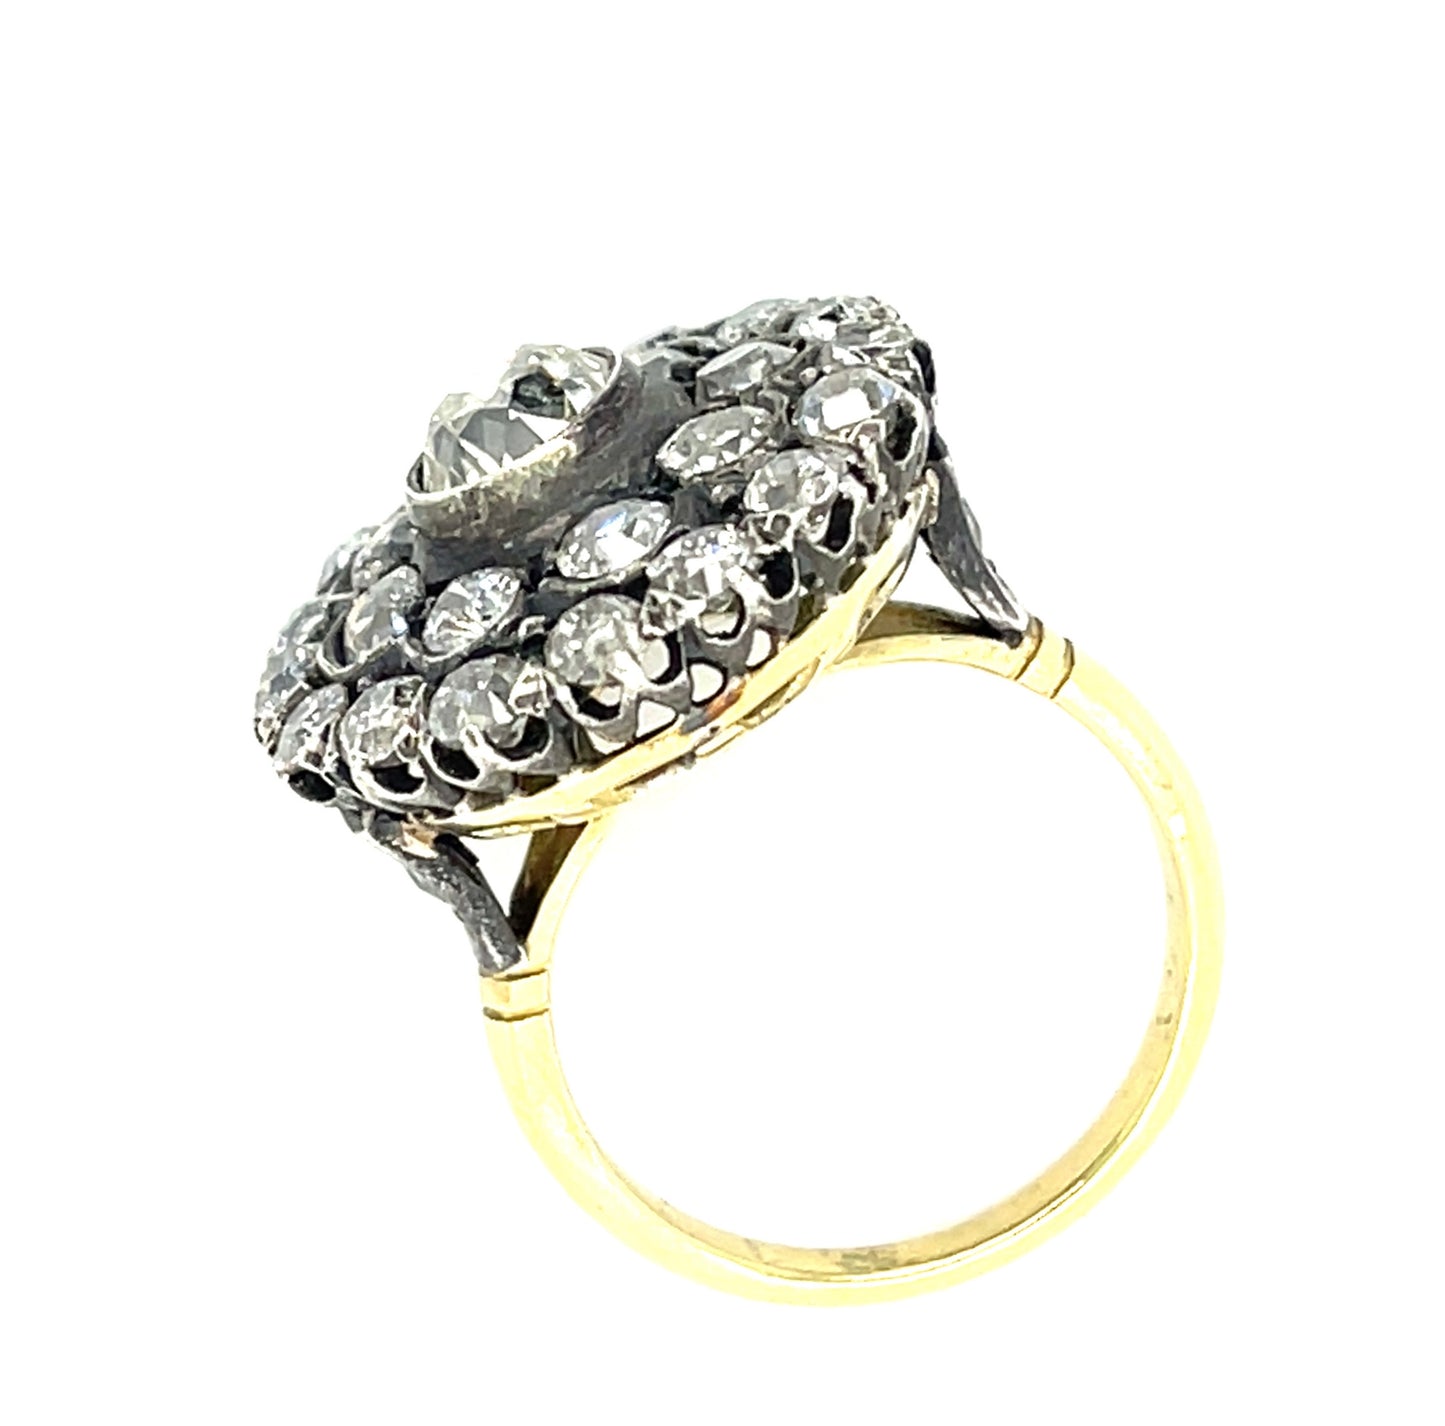 1ct Old Mine Cut Center Diamond 2.80ct SD Handmade Silver over 18KY Ring